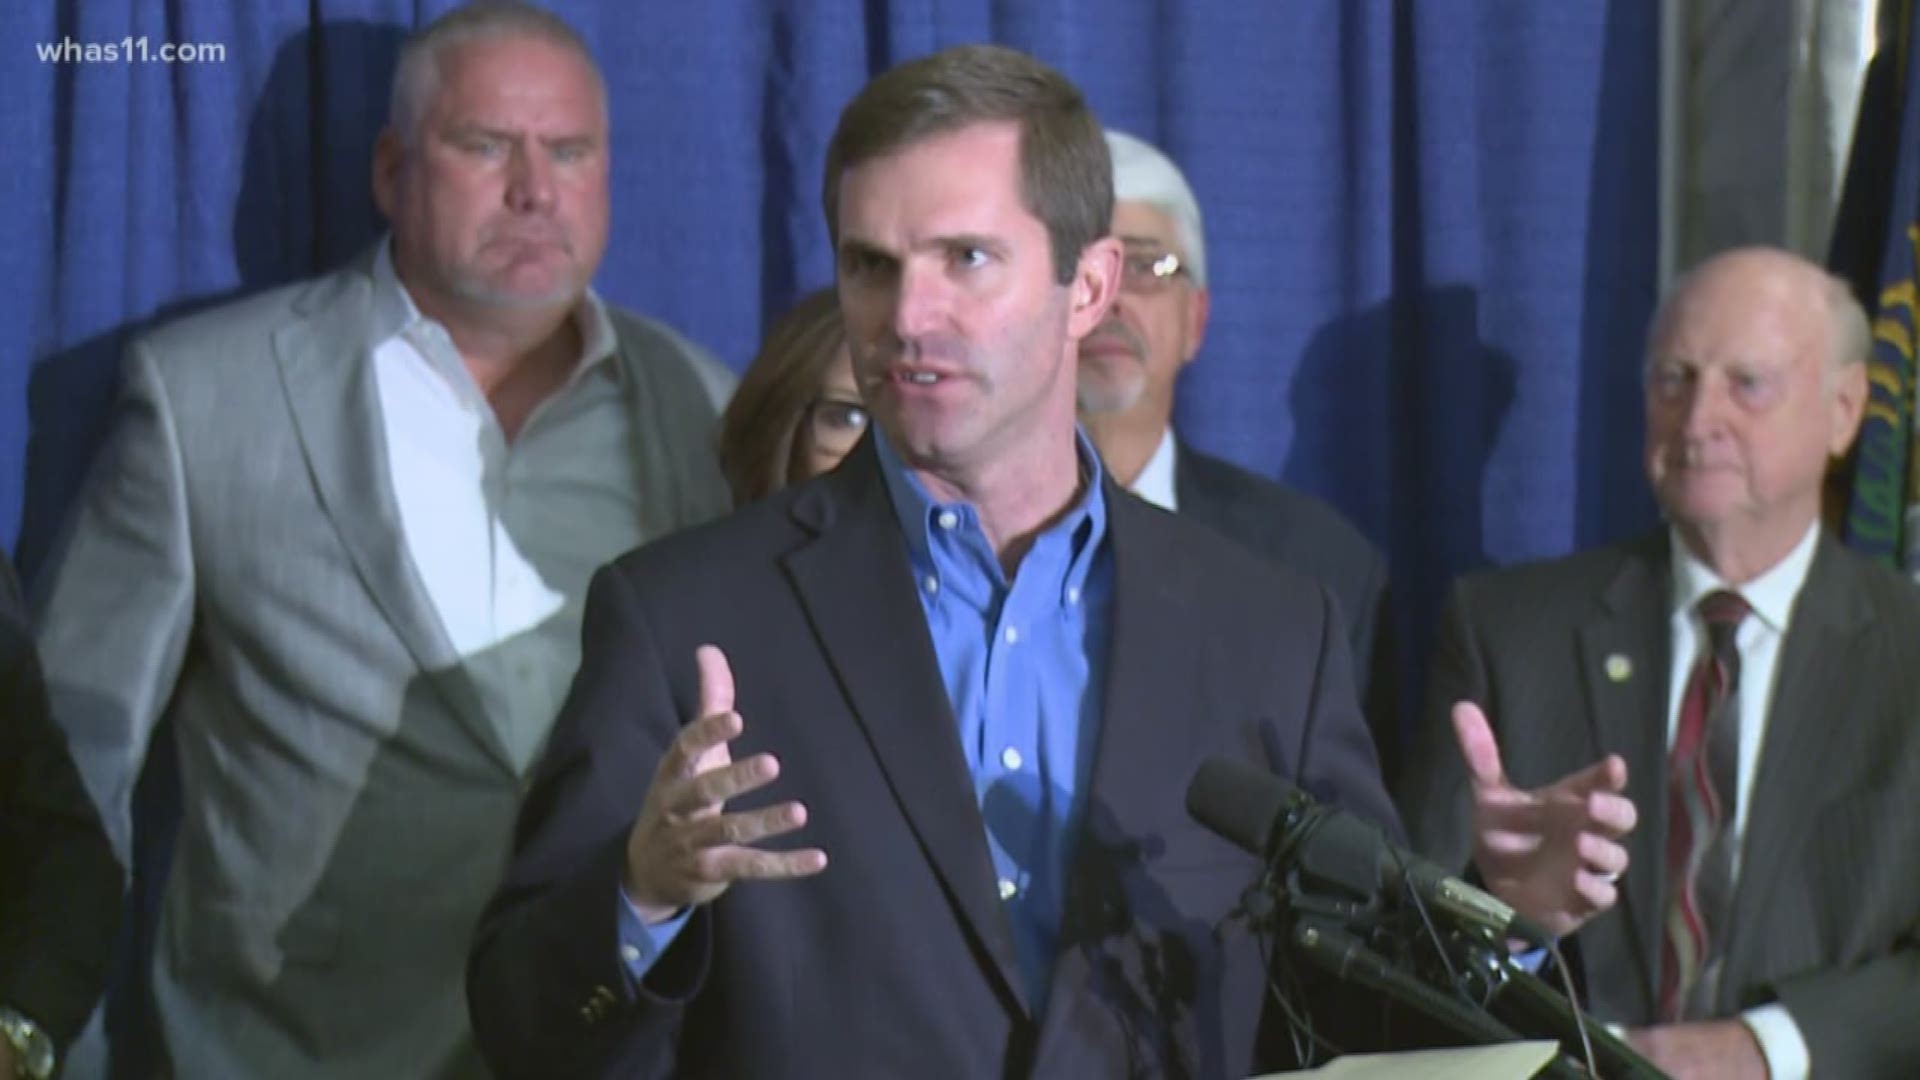 On his first official day as governor-elect Andy Beshear held a press conference about his transition team.